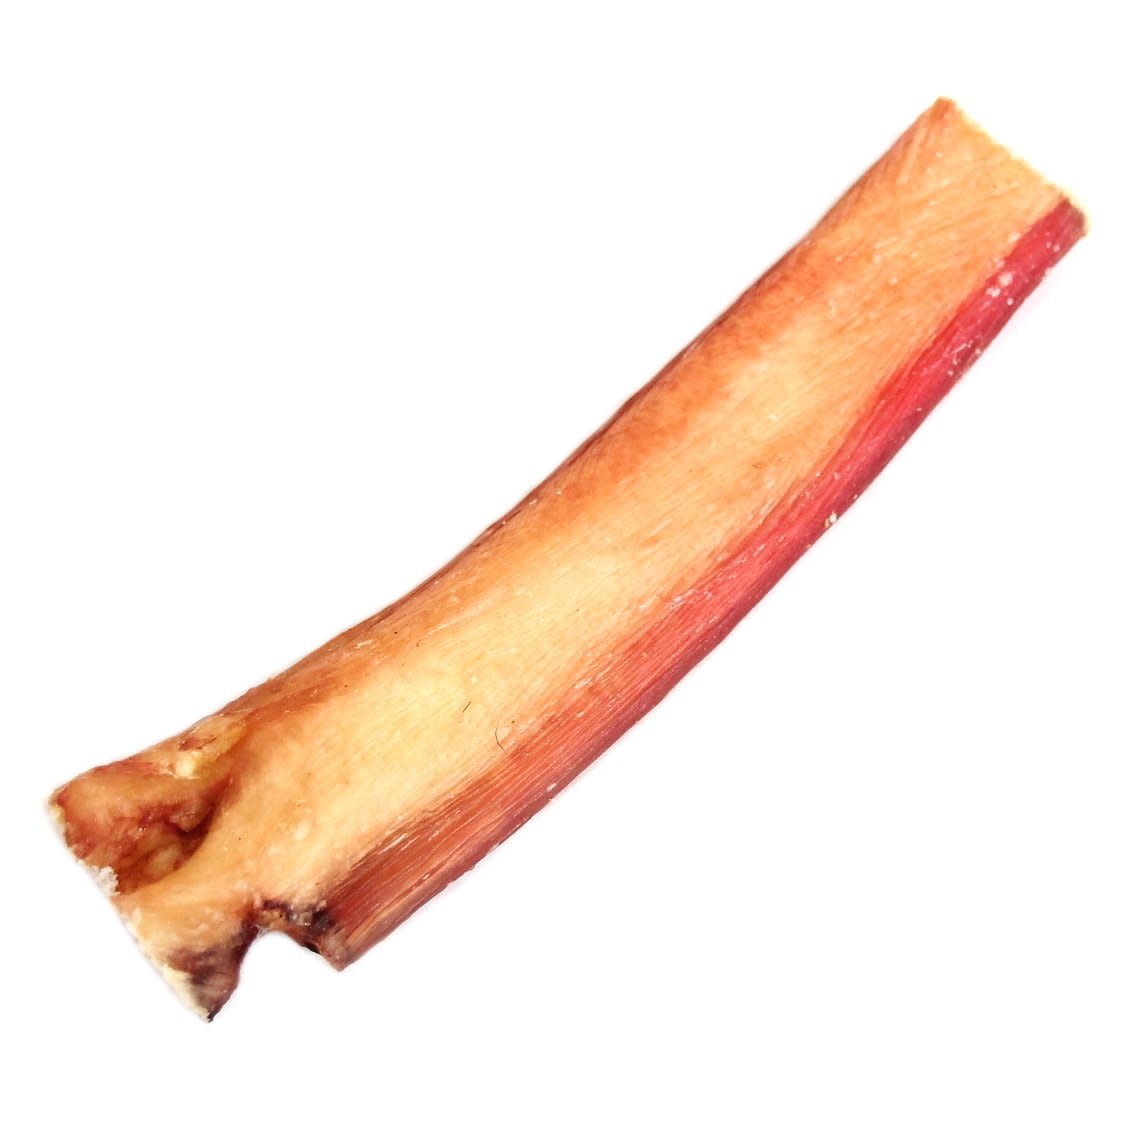 The Natural Dog Co. NDC 6" Thick Bully Stick Odor Free